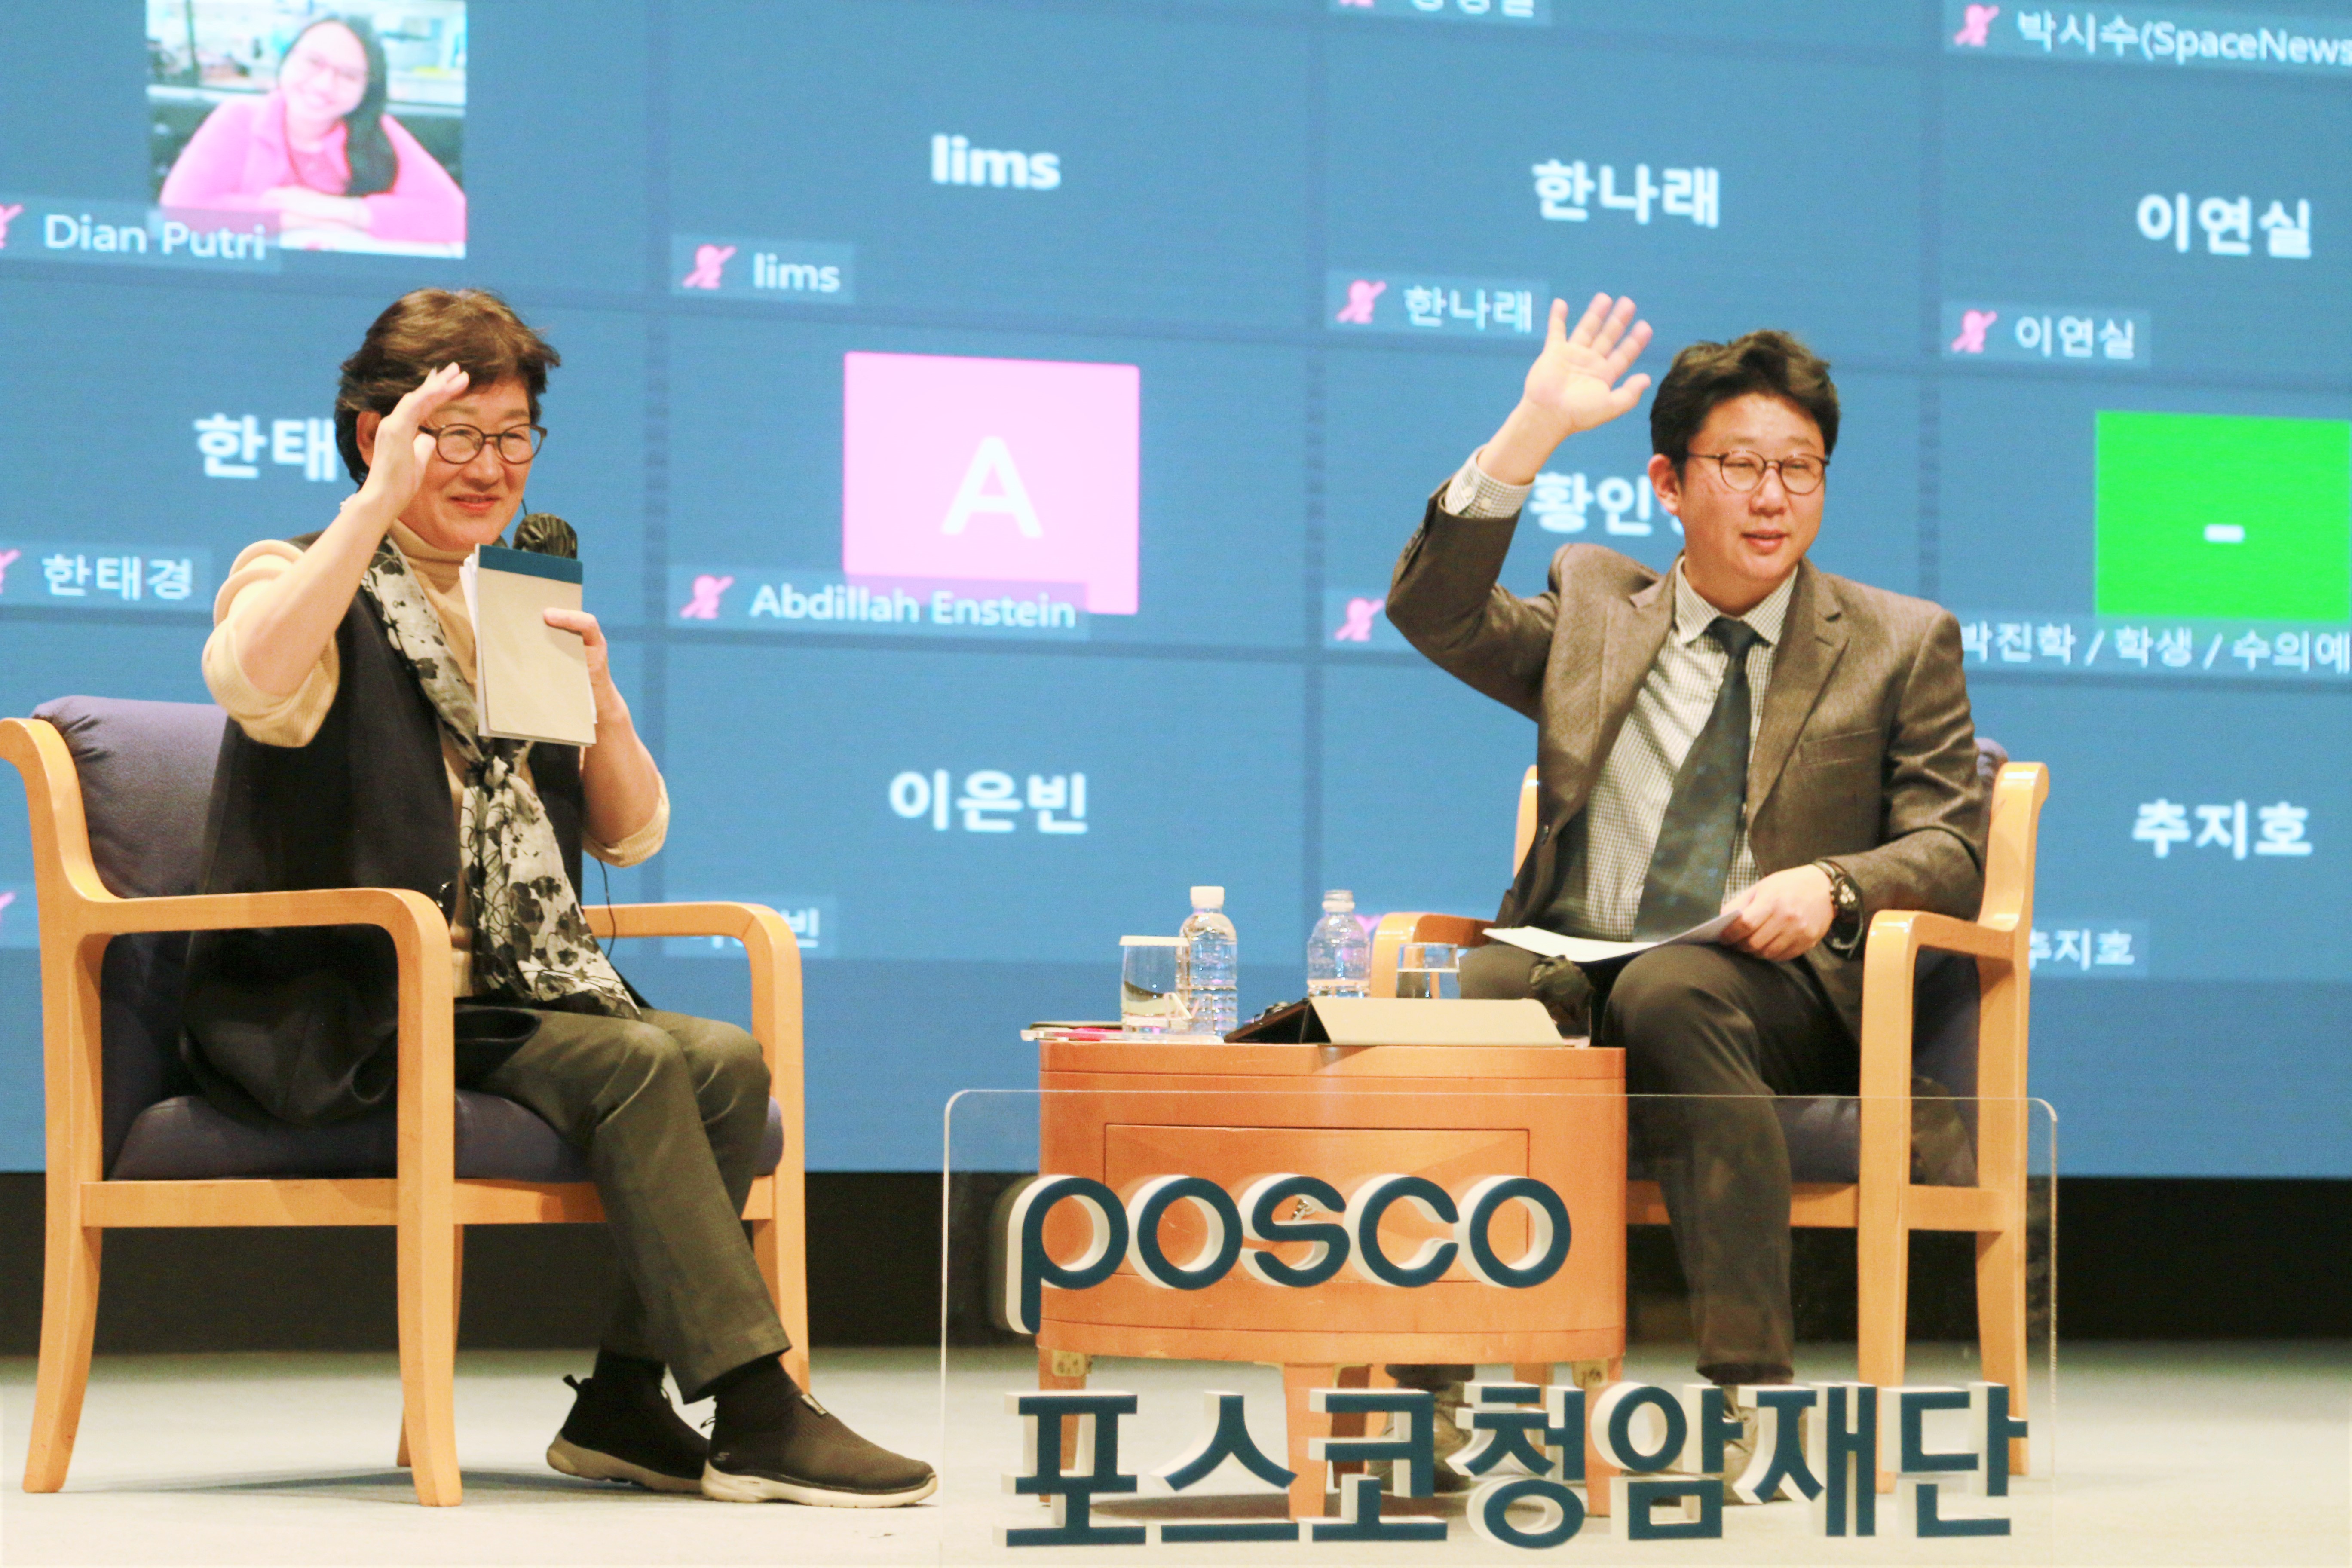 The speaker and the moderator is greeting the audience by waving their hands, smiling.